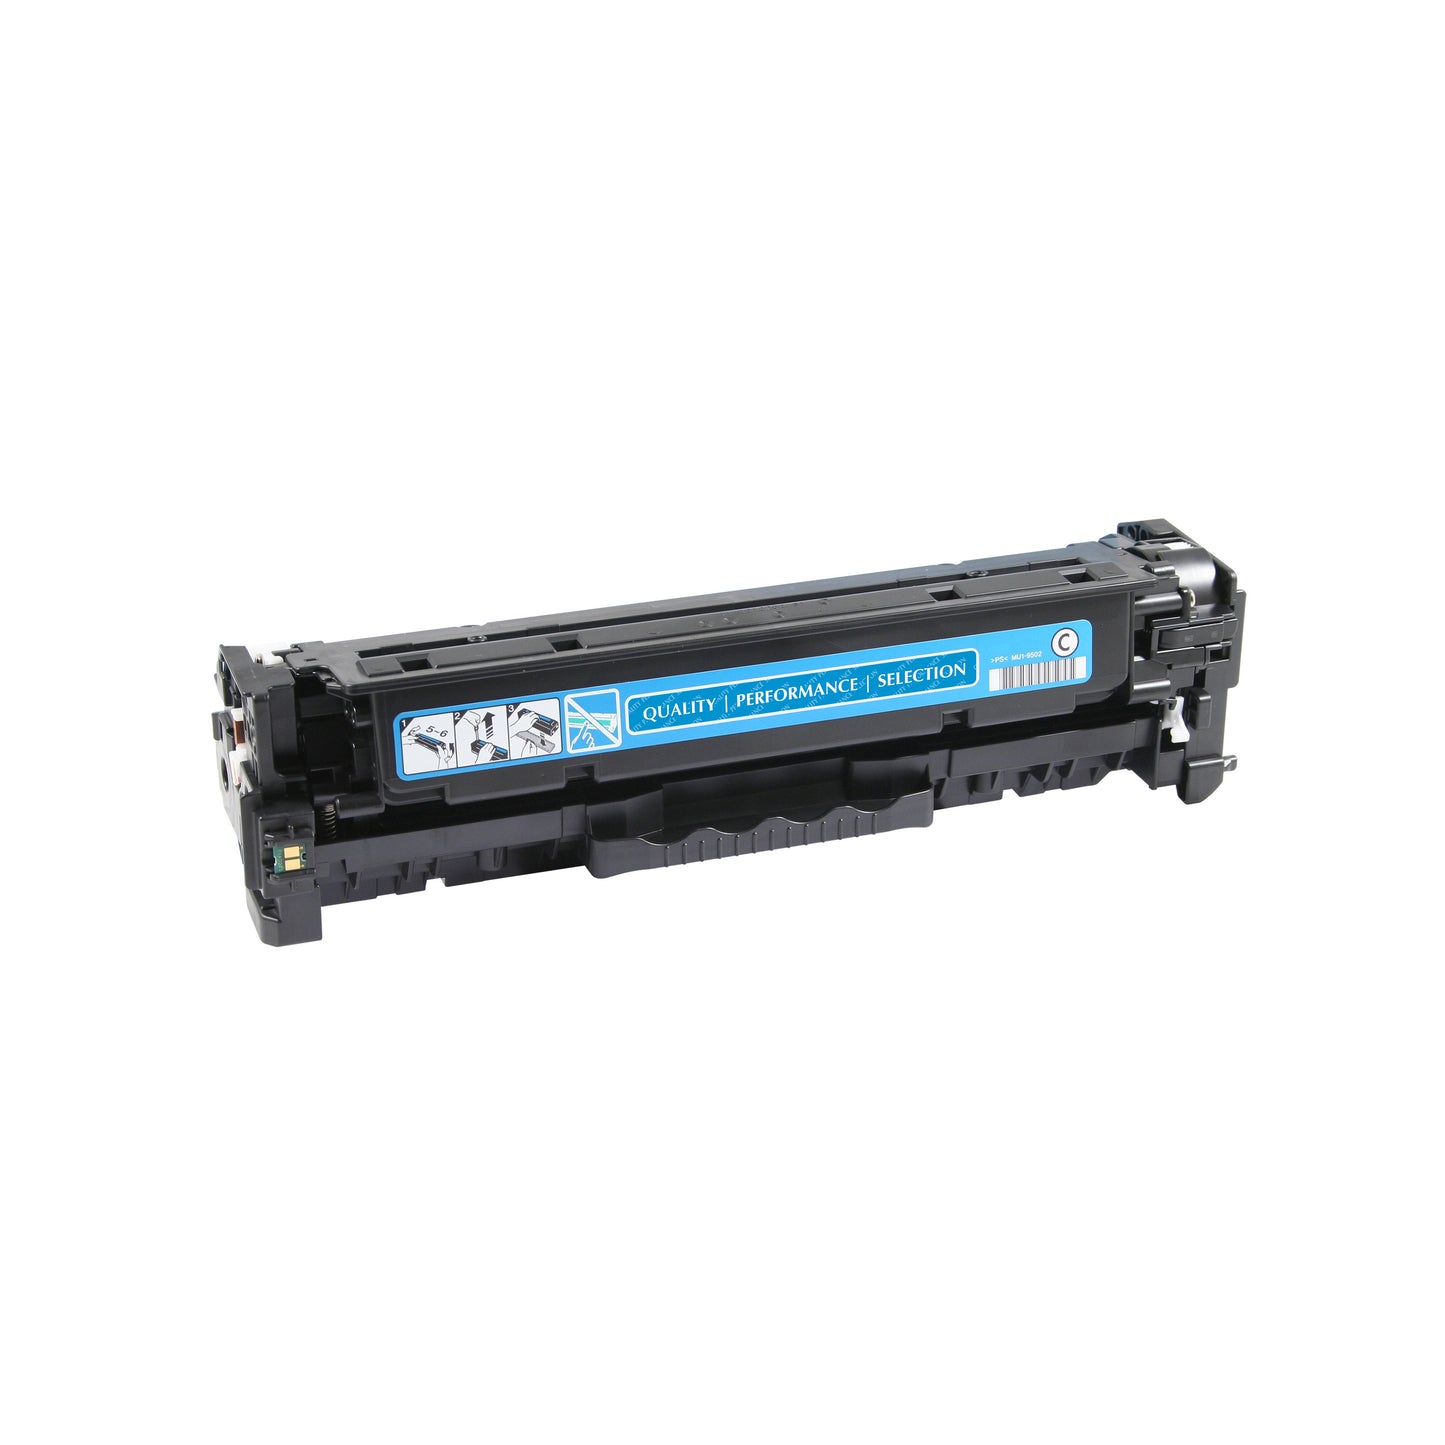 HP 312A (CF381A) Cyan Remanufactured Toner Cartridge [2,700 pages]